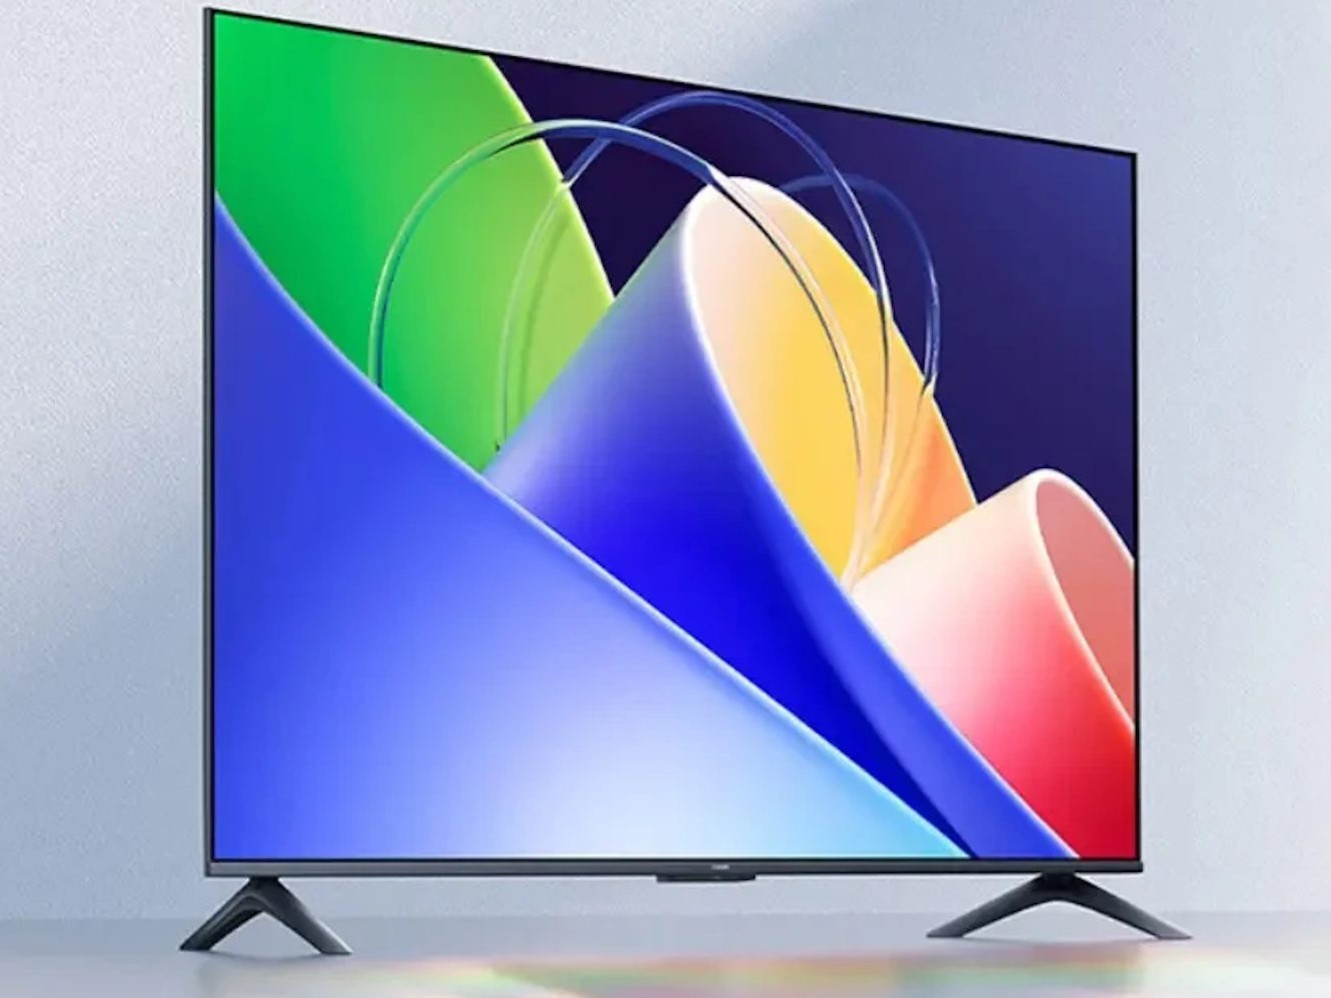 Xiaomi TV A50: Unveiling a New, Budget-friendly 4K Television with Speedy WiFi